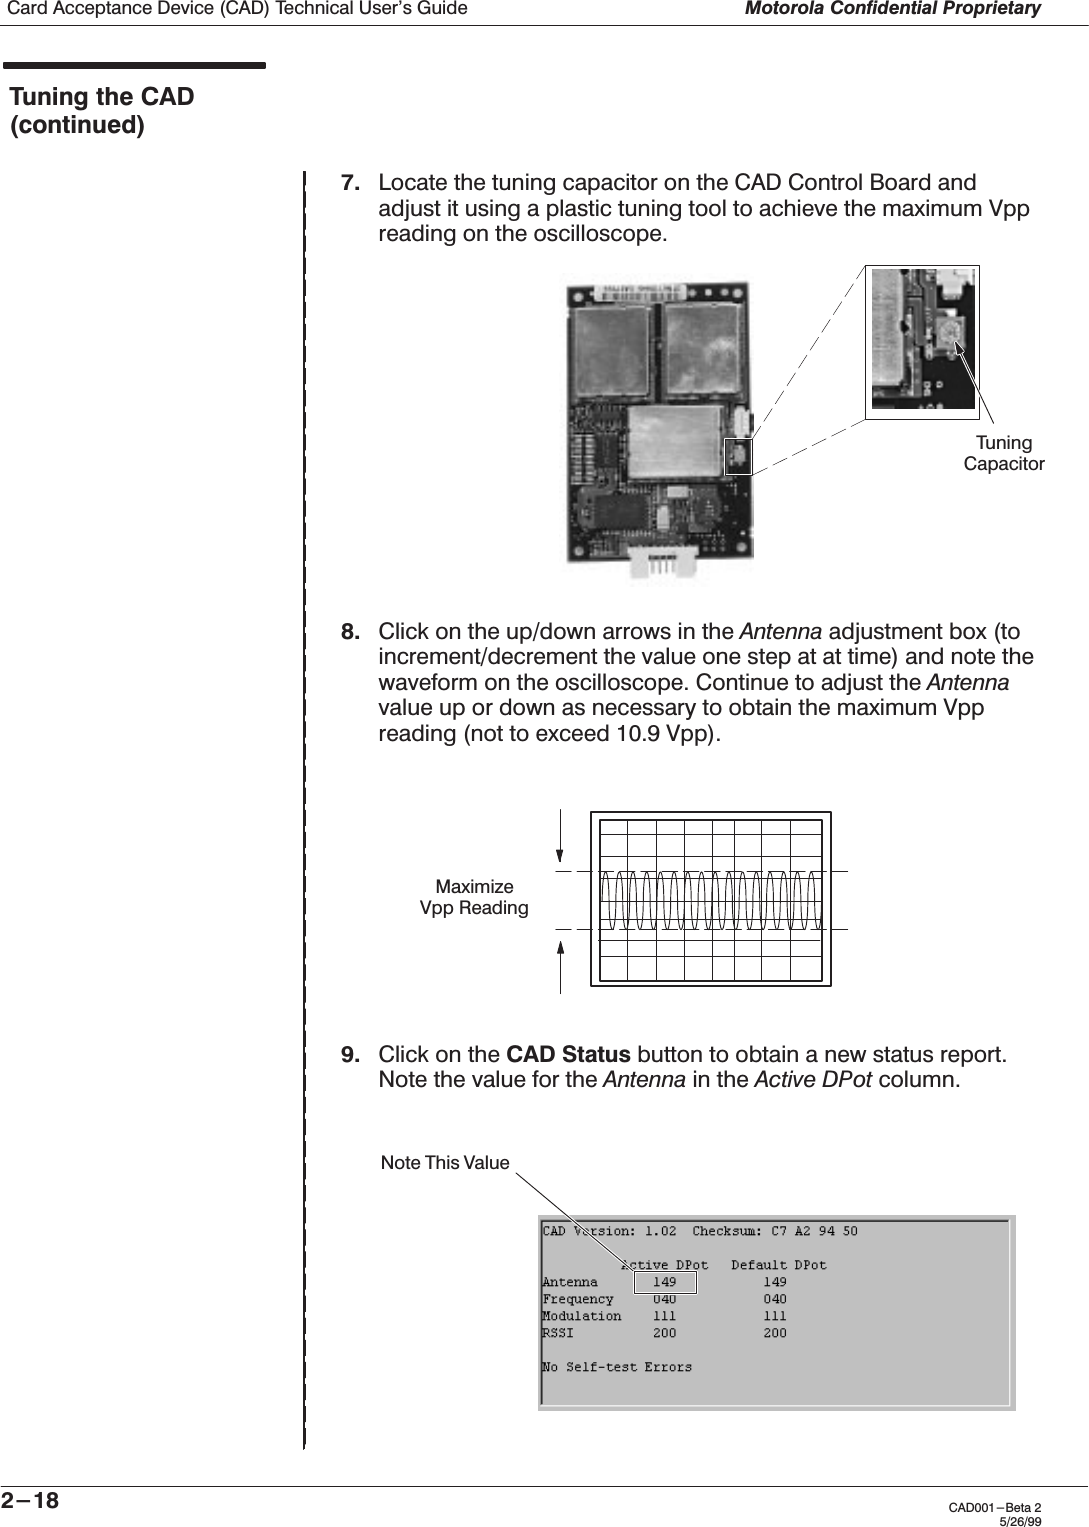 Card Acceptance Device (CAD) Technical User&apos;s Guide Motorola Confidential Proprietary2-18 CAD001-Beta 25/26/99Tuning the CAD(continued)7. Locate the tuning capacitor on the CAD Control Board andadjust it using a plastic tuning tool to achieve the maximum Vppreading on the oscilloscope.8. Click on the up/down arrows in the Antenna adjustment box (toincrement/decrement the value one step at at time) and note thewaveform on the oscilloscope. Continue to adjust the Antennavalue up or down as necessary to obtain the maximum Vppreading (not to exceed 10.9 Vpp).9. Click on the CAD Status button to obtain a new status report.Note the value for the Antenna in the Active DPot column.MaximizeVpp Reading Note This ValueTuning Capacitor